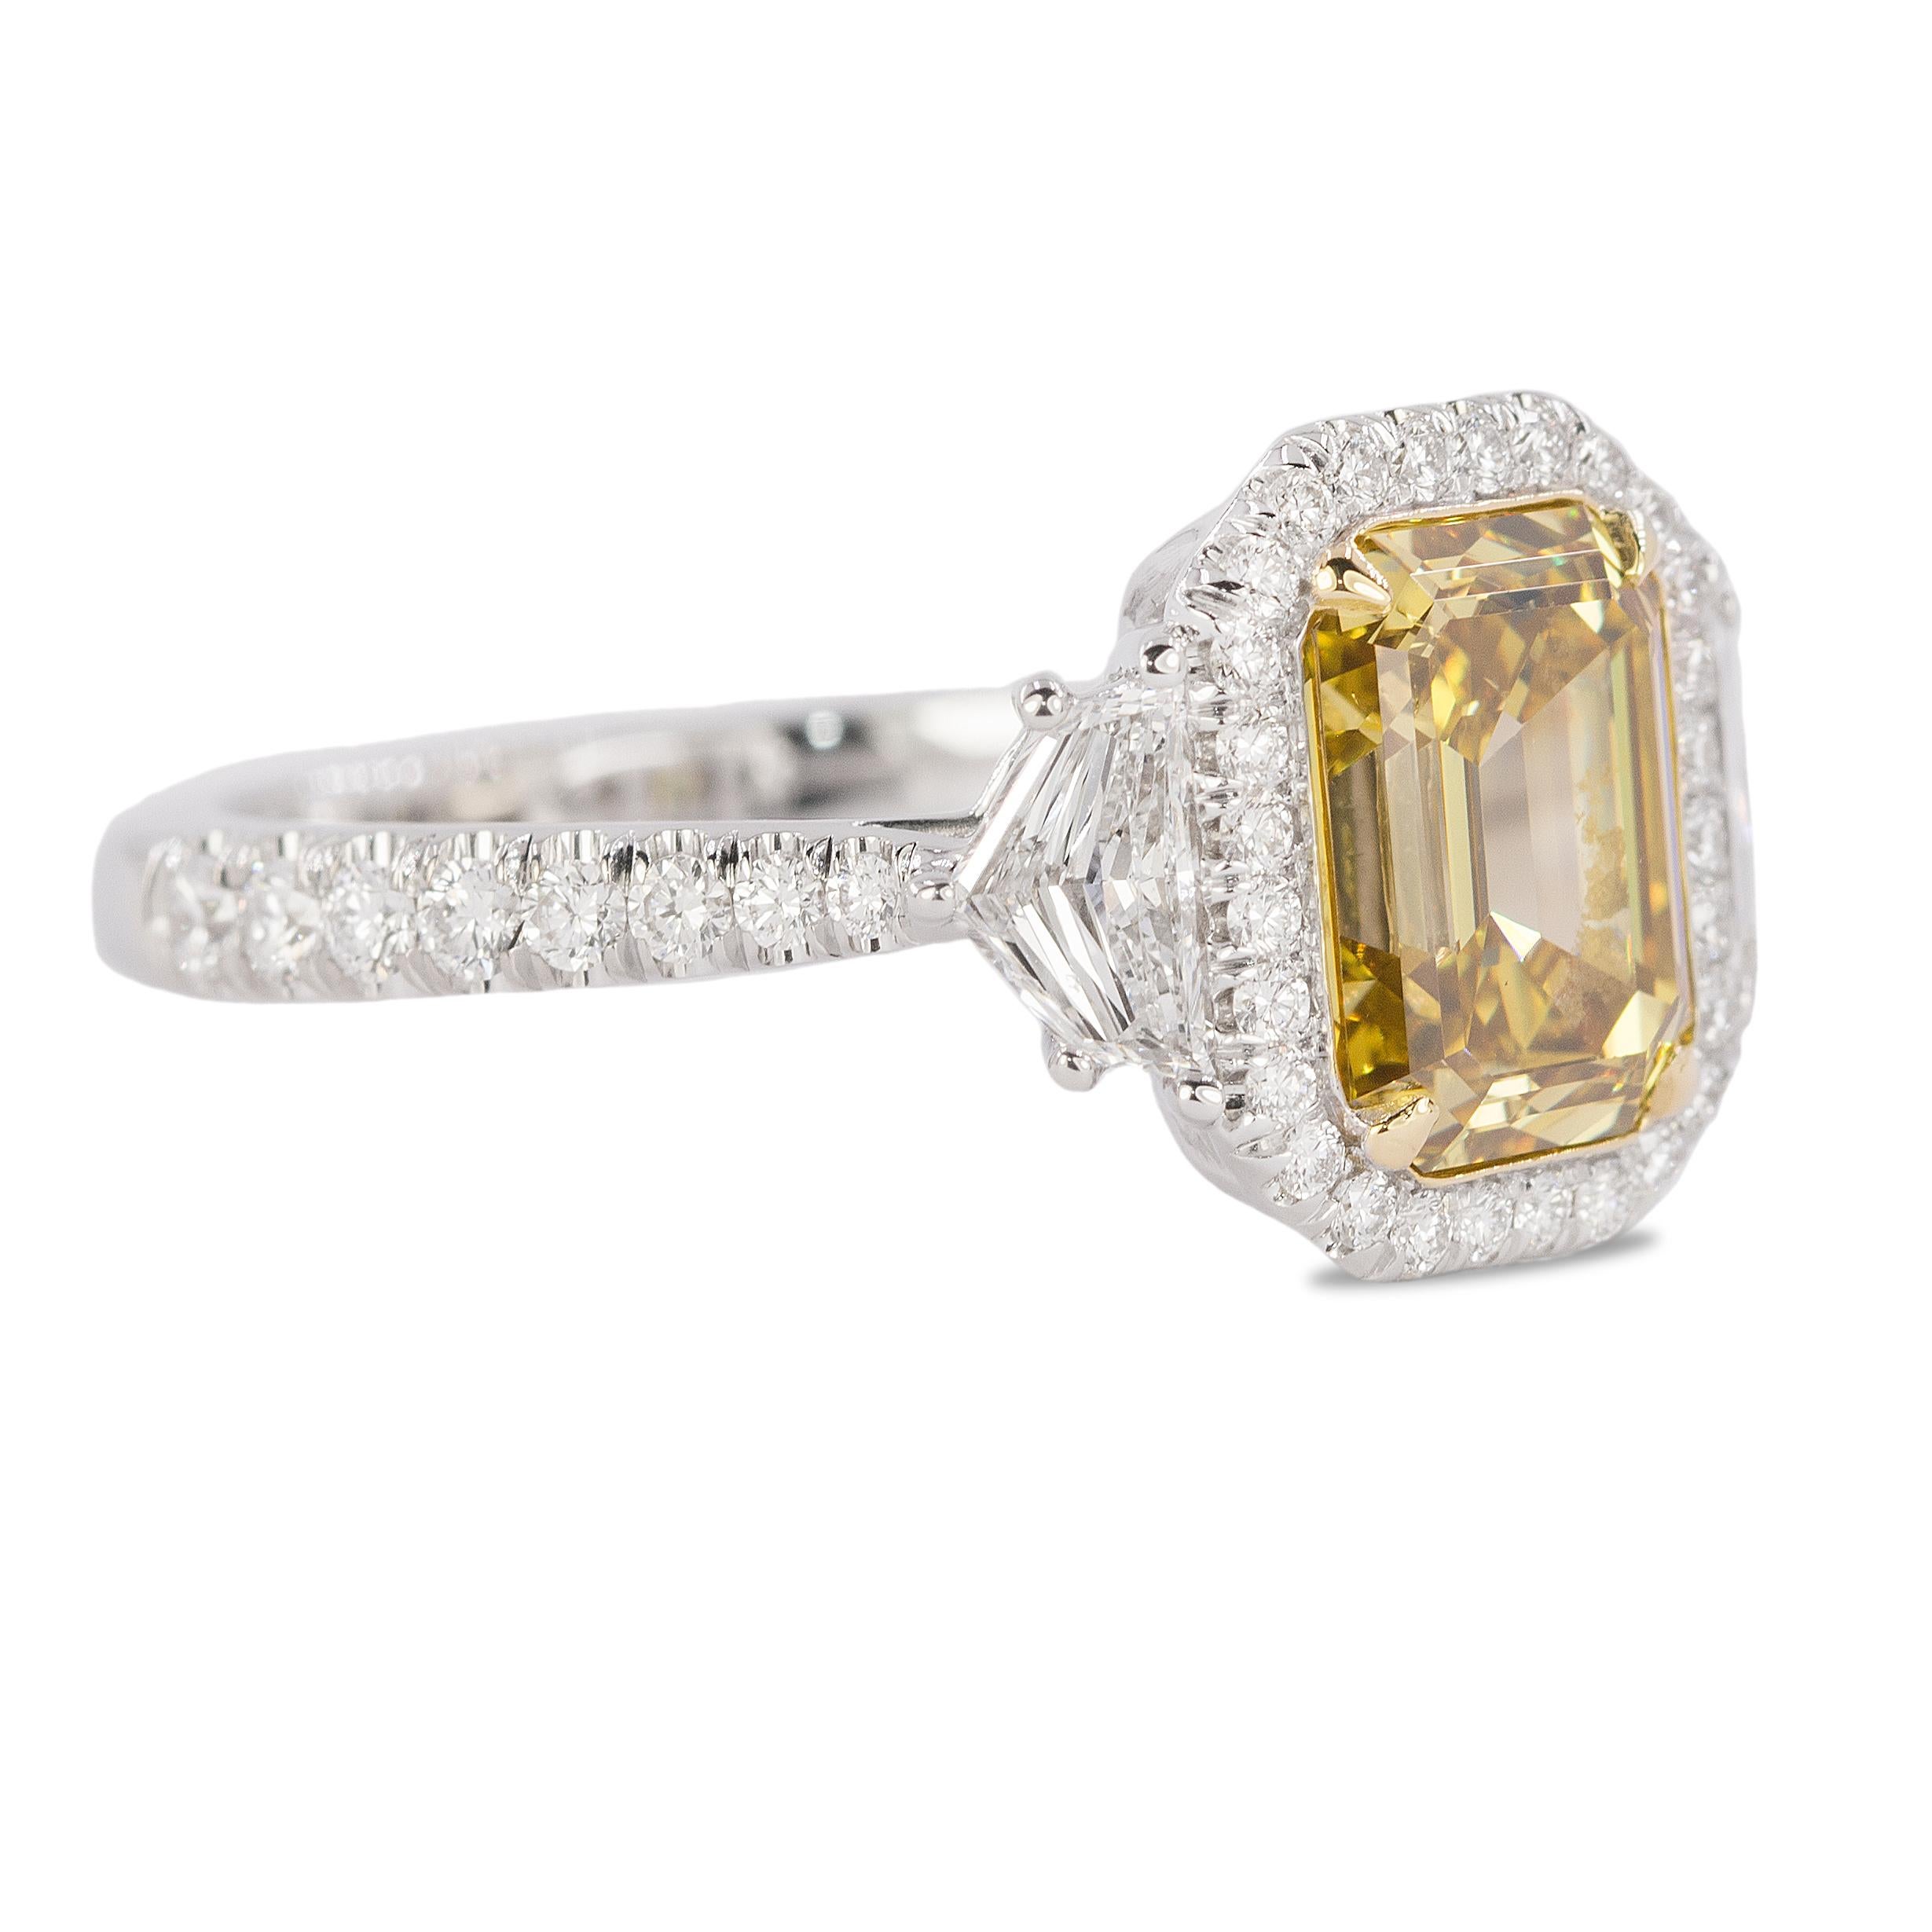 18kw ring with one GIA certified Fancy Deep Brownish Yellow VS2 clarity emerald cut diamond weighing 2.26 carats and two sheilds weighing 0.52 carats and 44 round diamonds weighing 0.56 carats, 5.25g